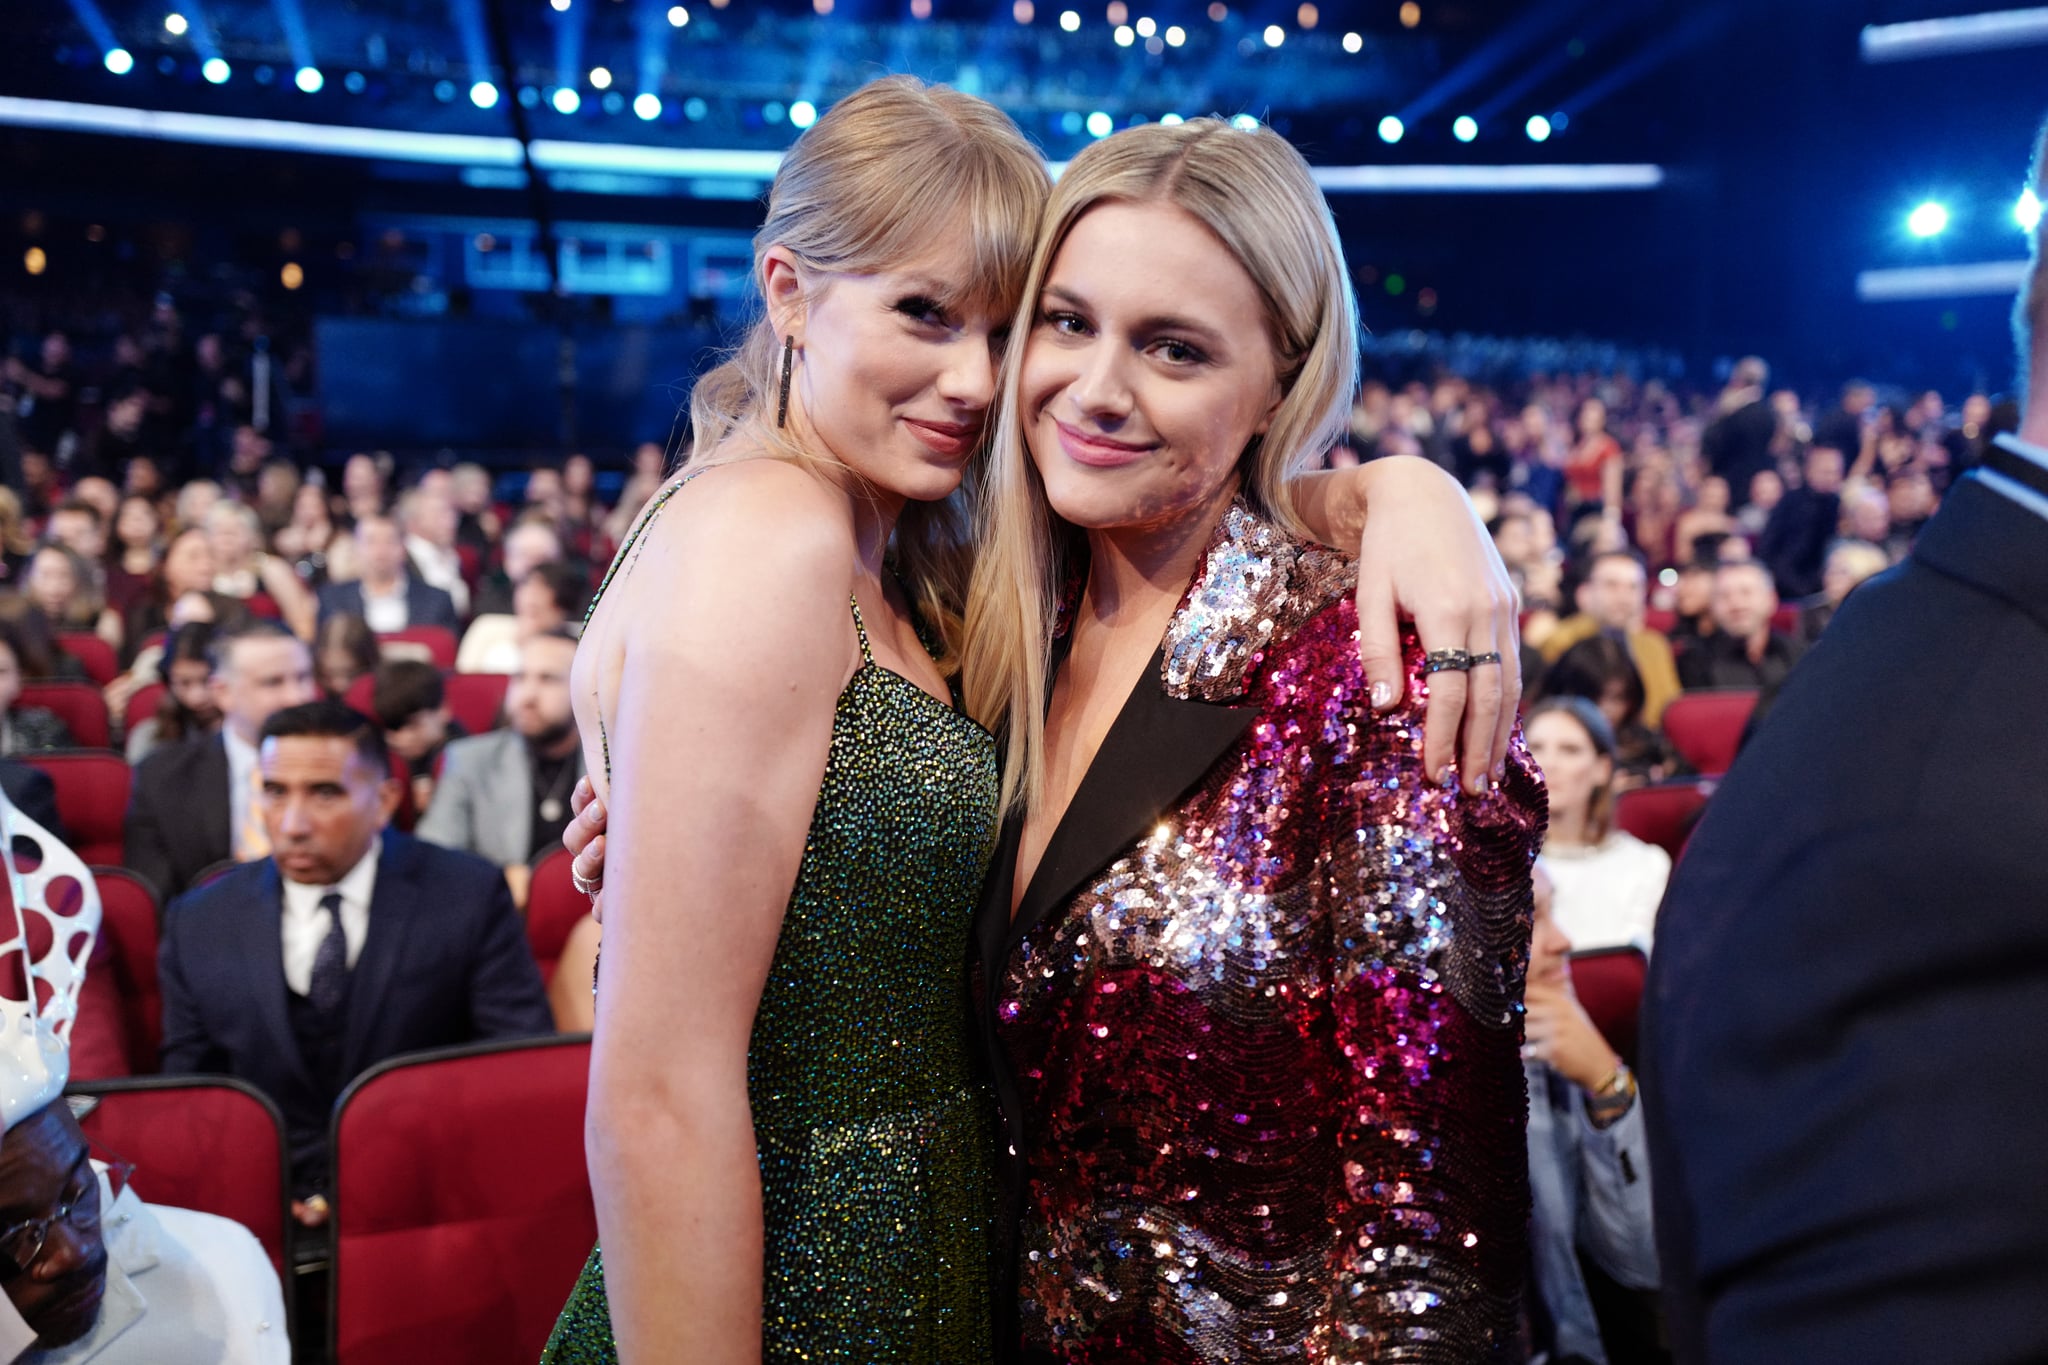 LOS ANGELES, CALIFORNIA - NOVEMBER 24: (L-R) Taylor Swift and Kelsea Ballerini attend the 2019 American Music Awards at Microsoft Theatre on November 24, 2019 in Los Angeles, California. (Photo by John Shearer/AMA2019/Getty Images for dcp)